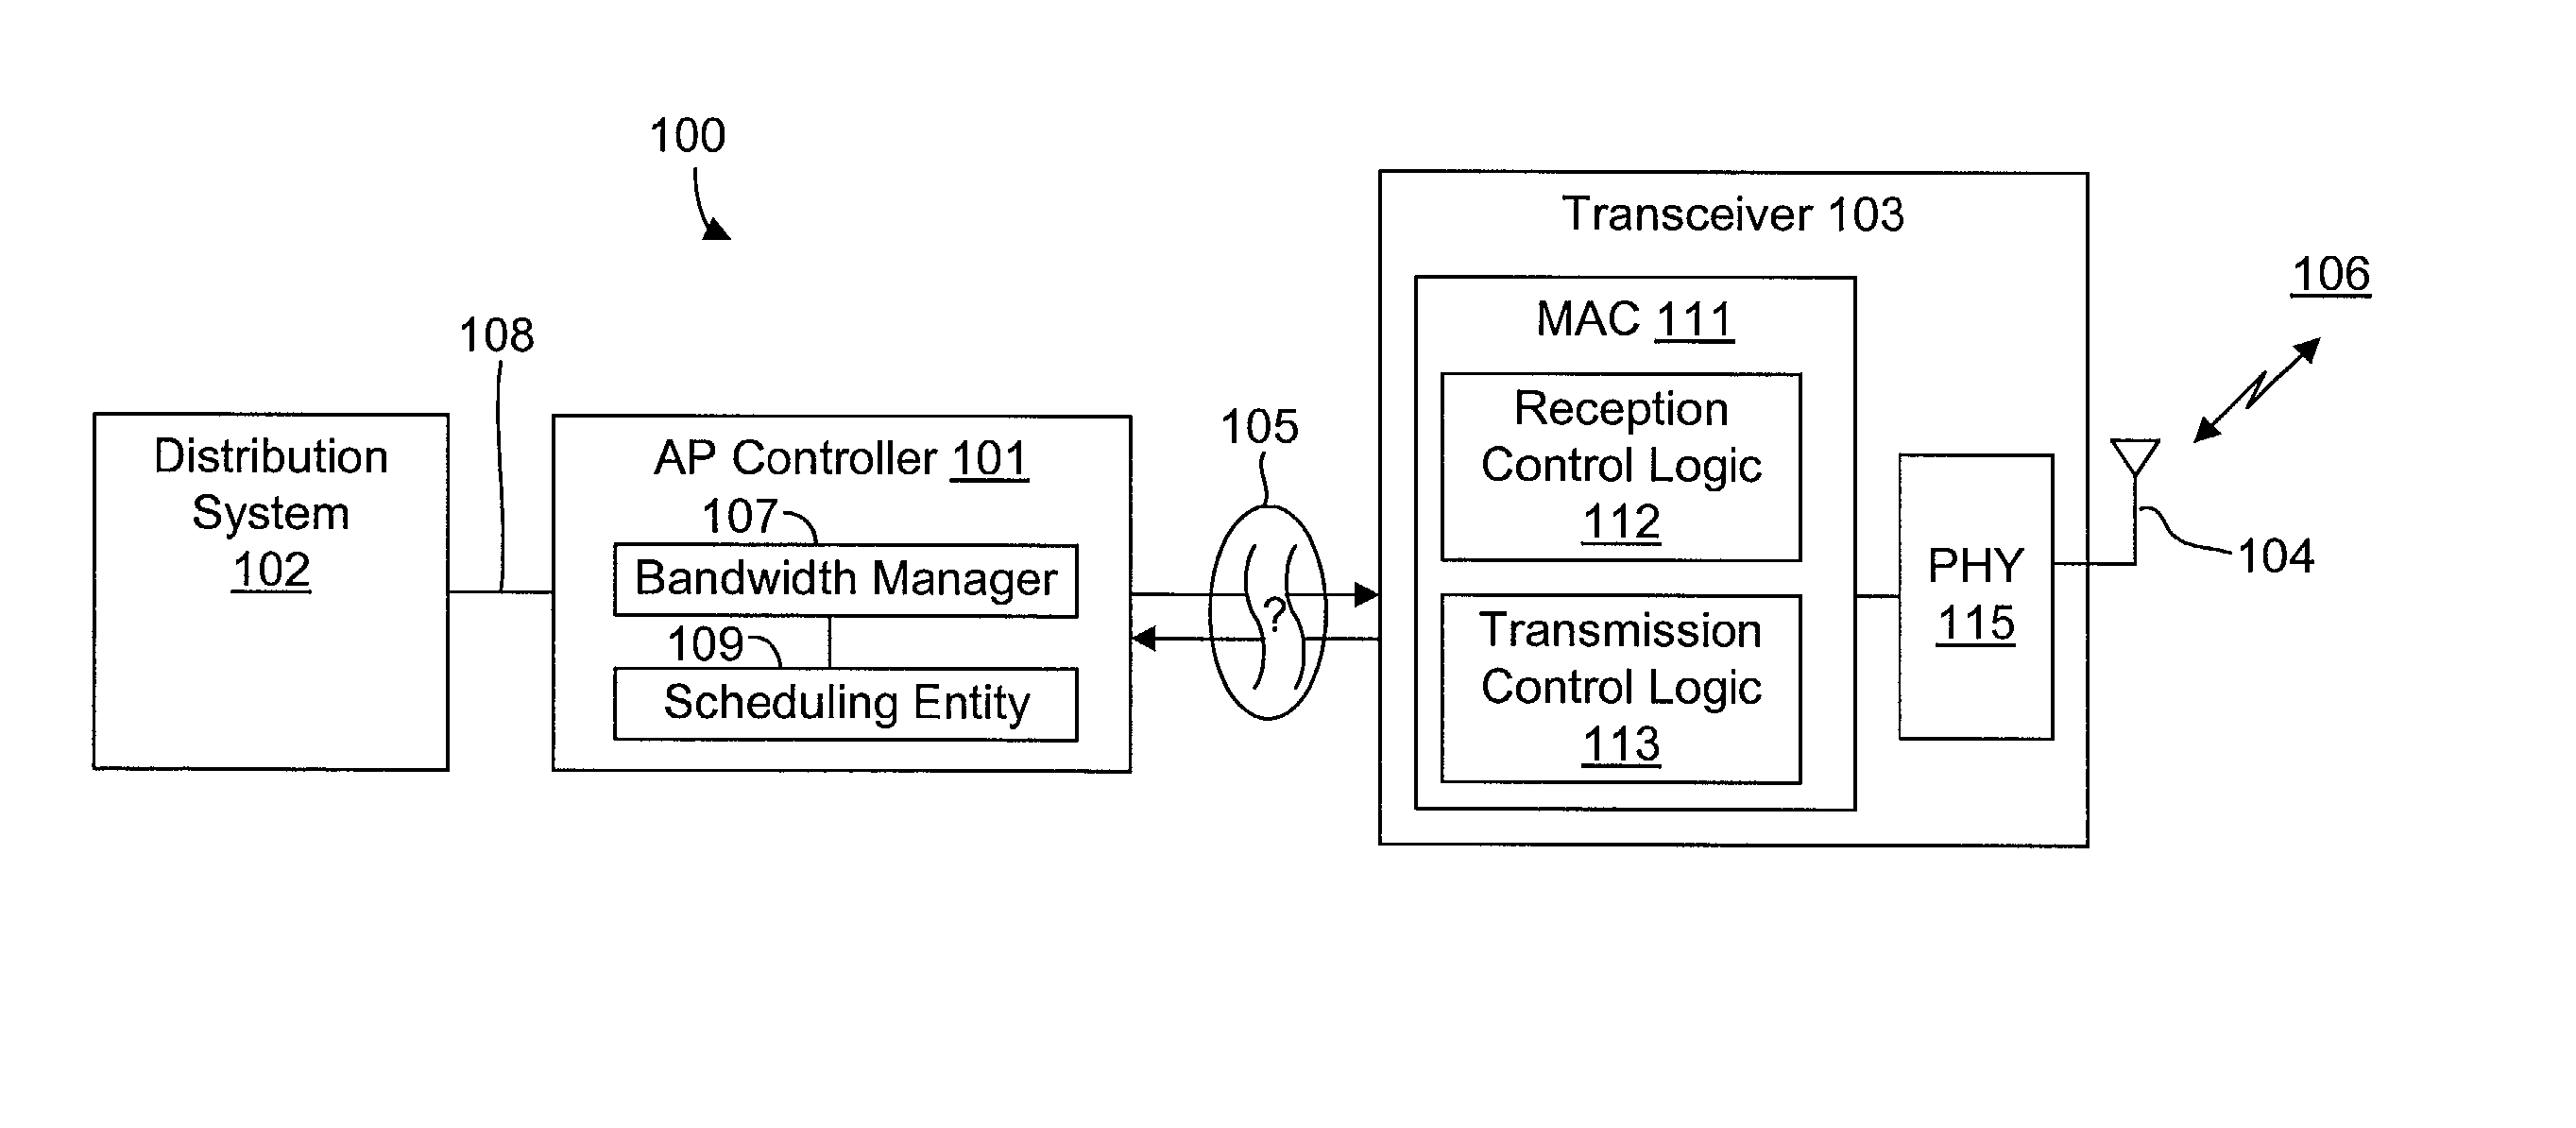 System and method for providing a selectable retry strategy for frame-based communications